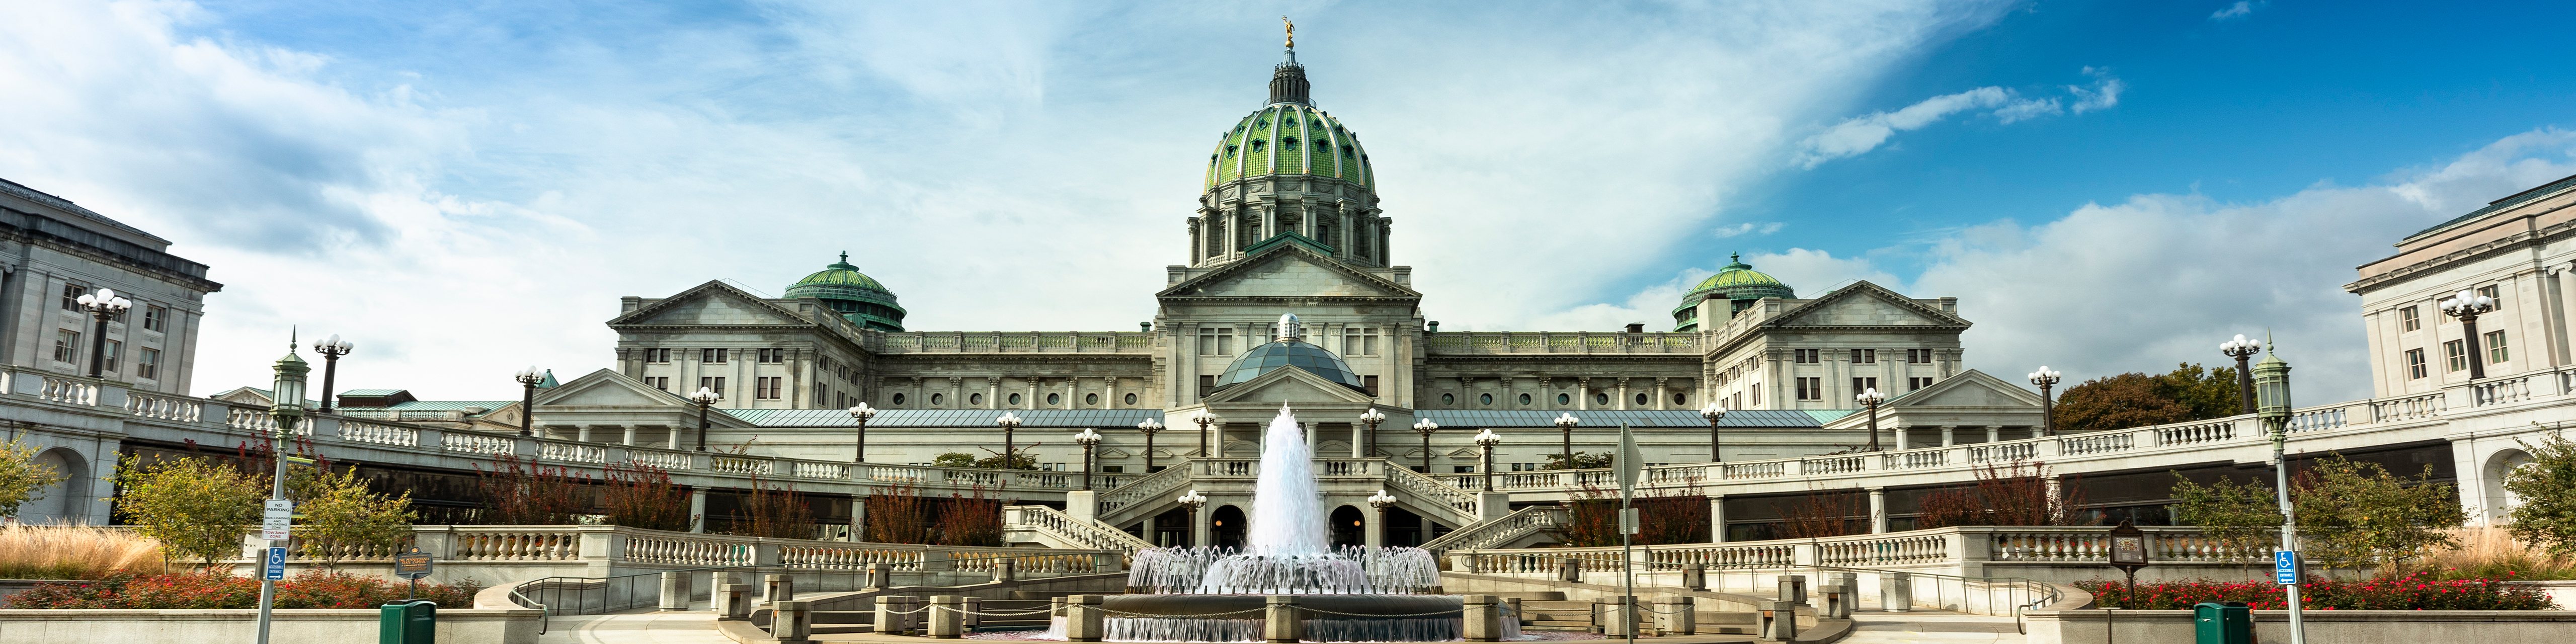 Building exterior and fountain of the Pennsylvania State Capitol building in downtown Harrisburg, PA